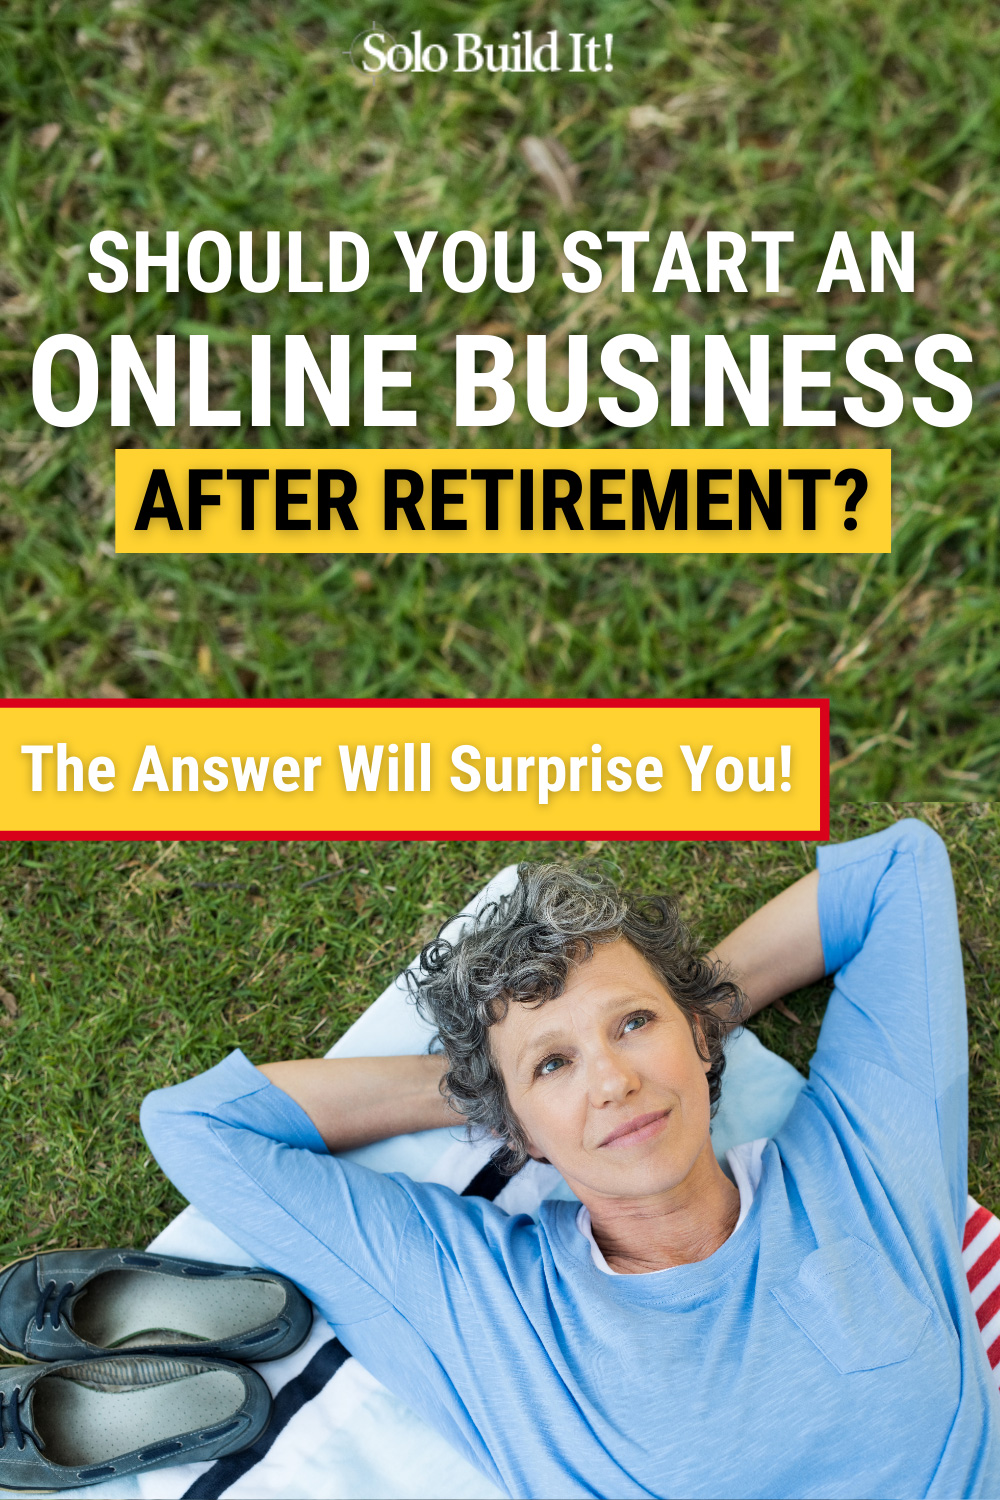 Should You Start an Online Business After Retirement?